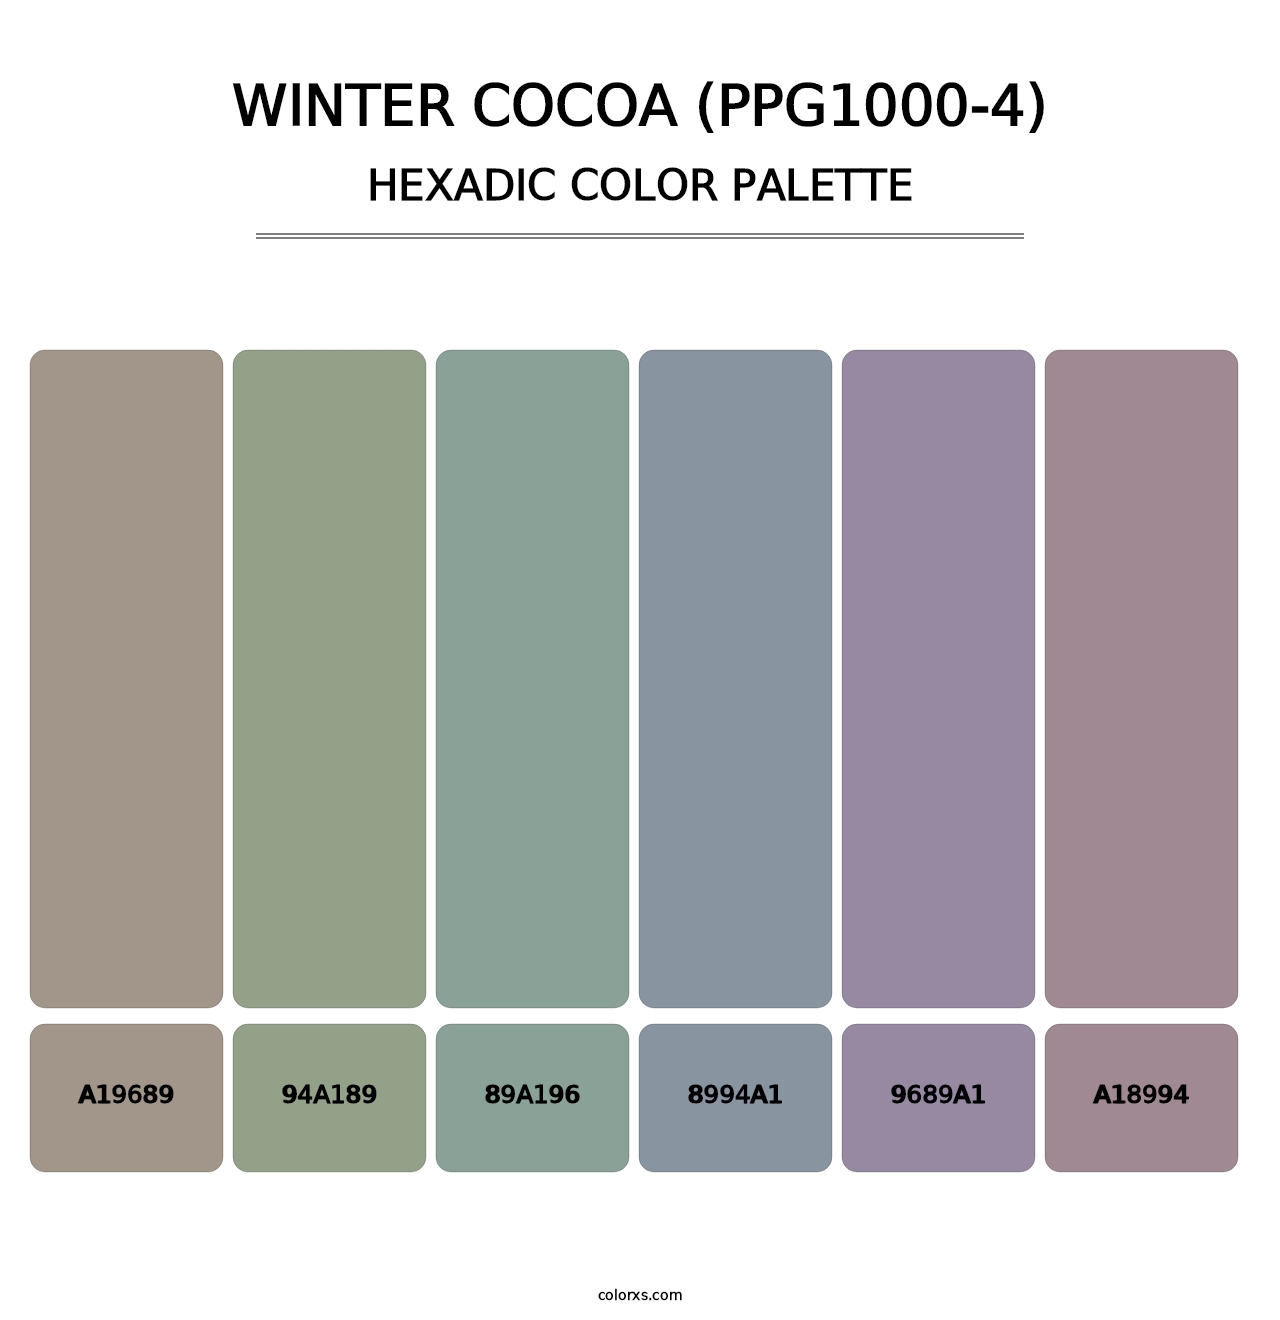 Winter Cocoa (PPG1000-4) - Hexadic Color Palette